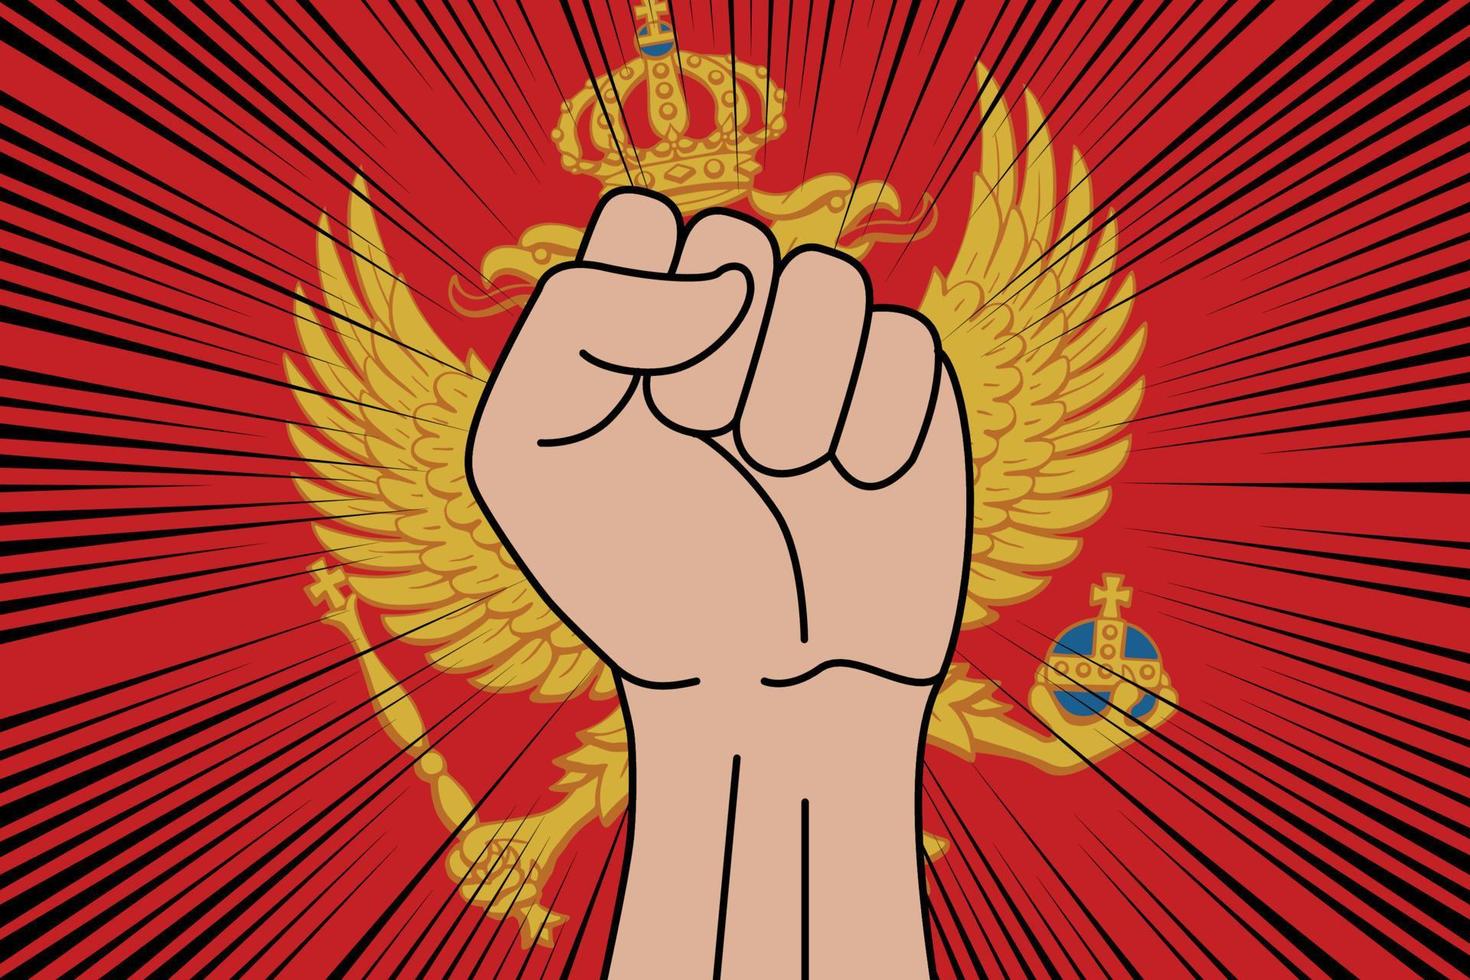 Human fist clenched symbol on flag of Montenegro vector